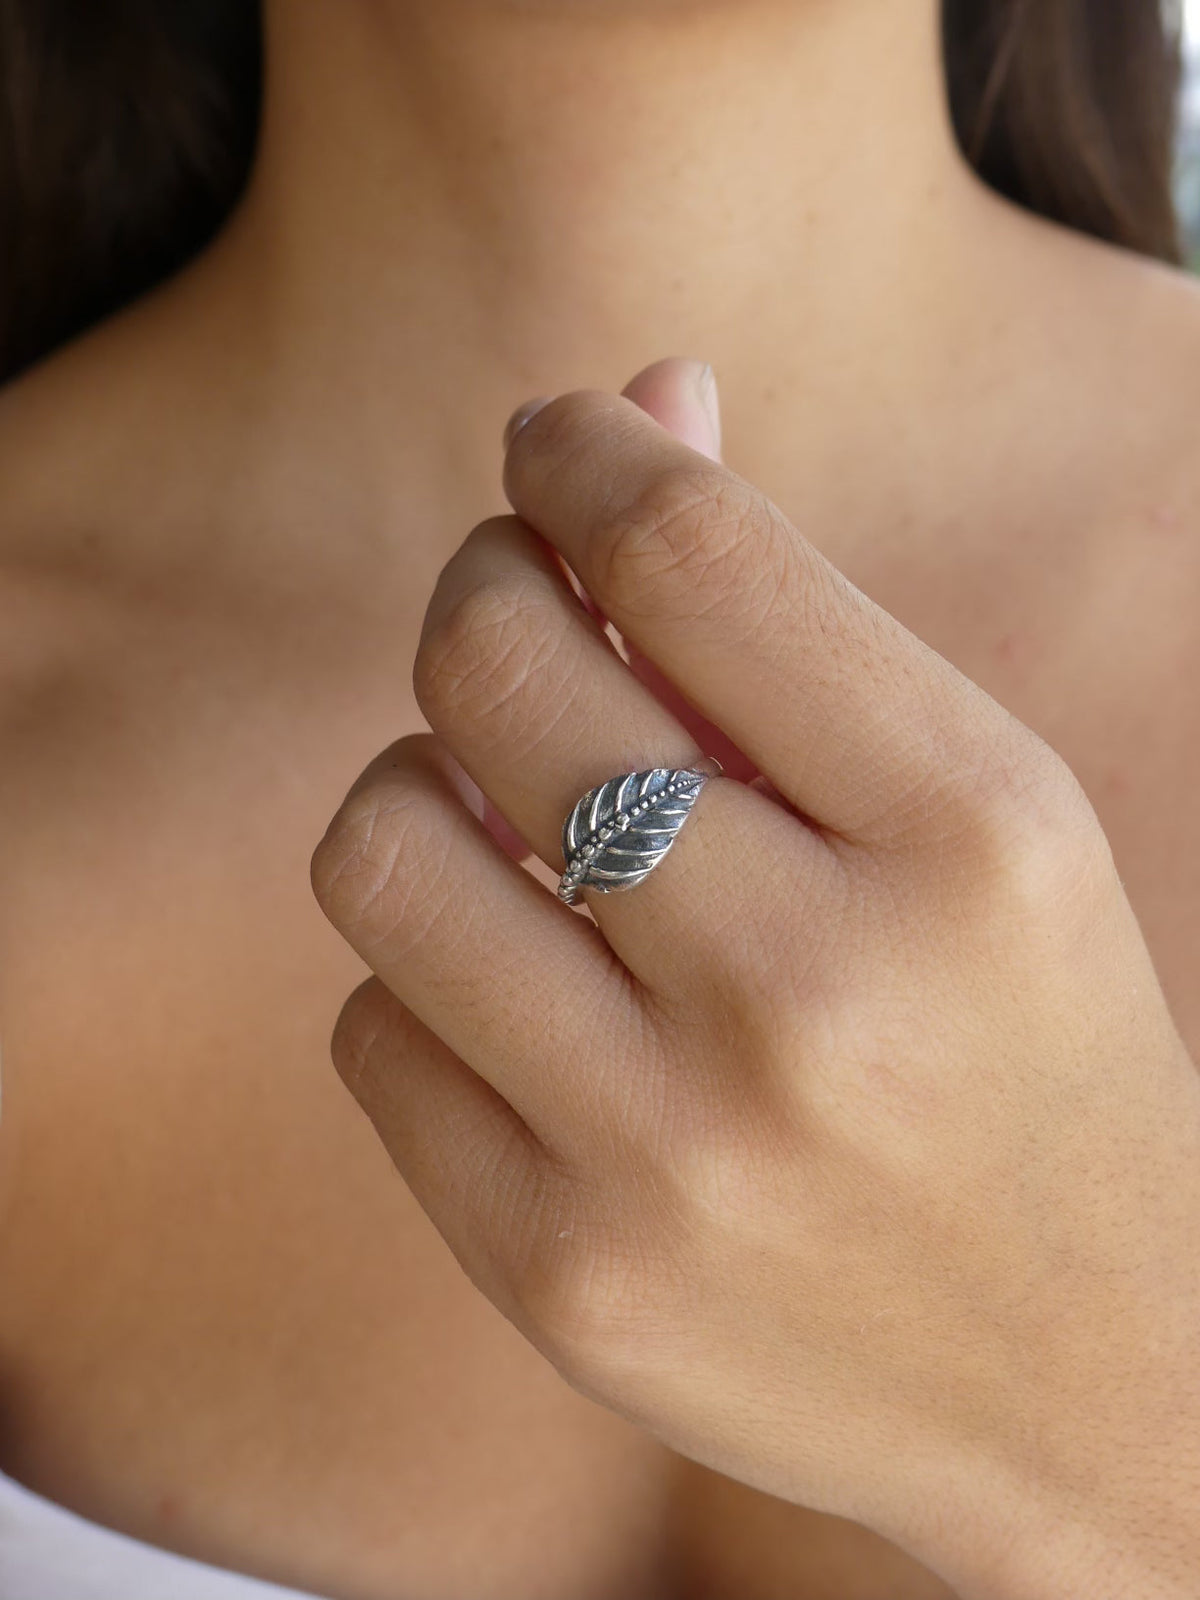 ring, silver rings, ring, nice rings, womens rings, leaf rings, ball rings, jewelry website, nice jewelry, size 6 rings, size 7 rings, size 8 rings, size 9 rings, 925 sterling silver rings, fashion jewelry, fine jewelry, kesley jewelry, silver ring, birthdya gifts, anniversary gifts, graduation gifts, holiday gifts, dainty rings, statement rings, gift ideas, nice jewelry, tarnish free jewelry, jewelry trending on tiktok, ring for women, ring, designer jewelry